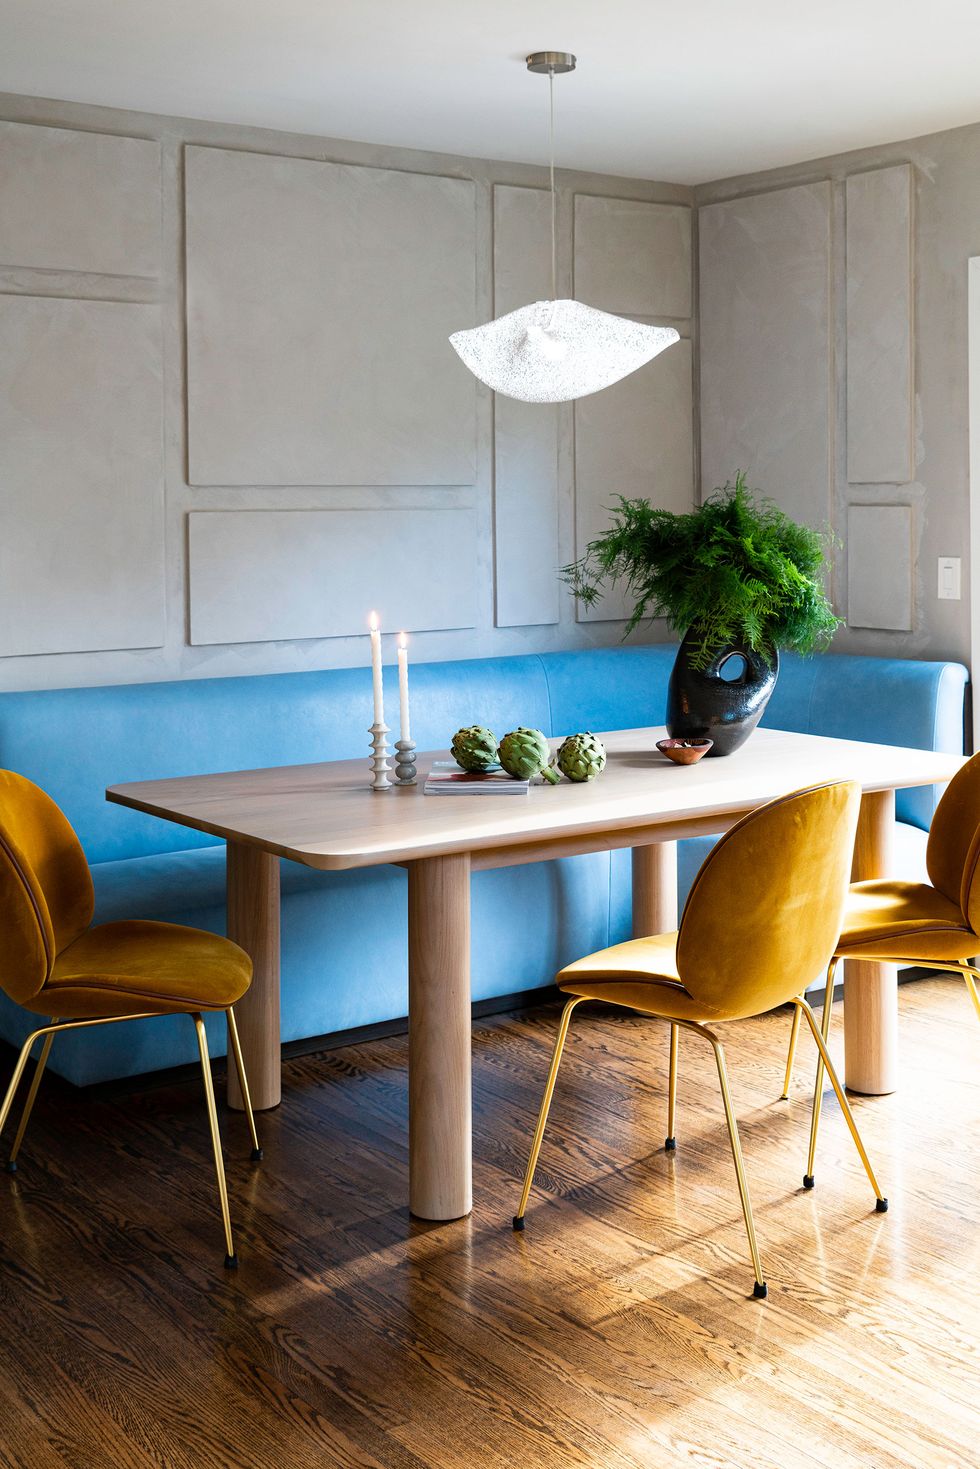 wooden dining table with rounded edges and upholstered yellow chairs with gold legs and a wraparound banquette in a bright blue